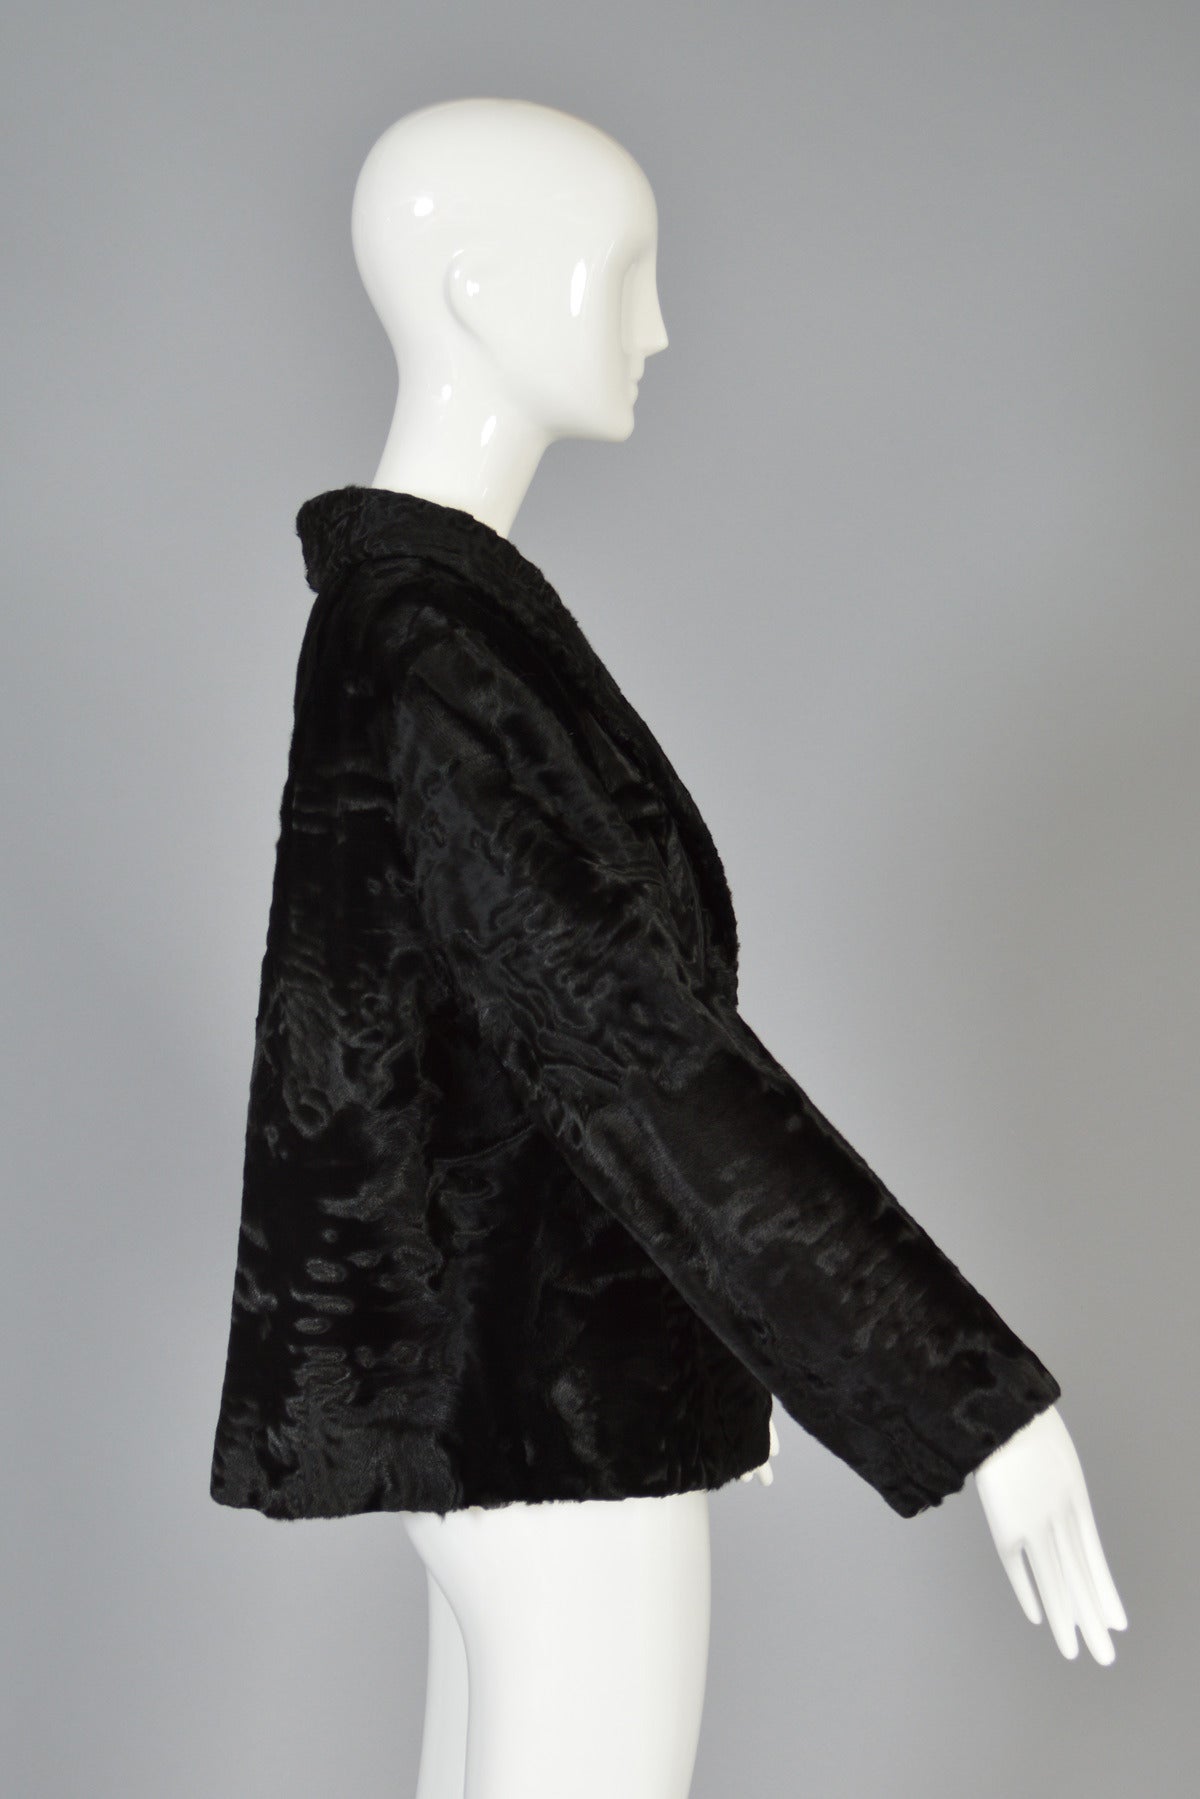 Superb 1950's cropped black broadtail jacket. Broadtail is EVERYTHING this season! Extremely high quality, velvety soft broadtail lamb fur. Ultra modern boxy cropped cut with a slight flare. Hidden asymmetric fur closures. Fully lined. Broadtail is